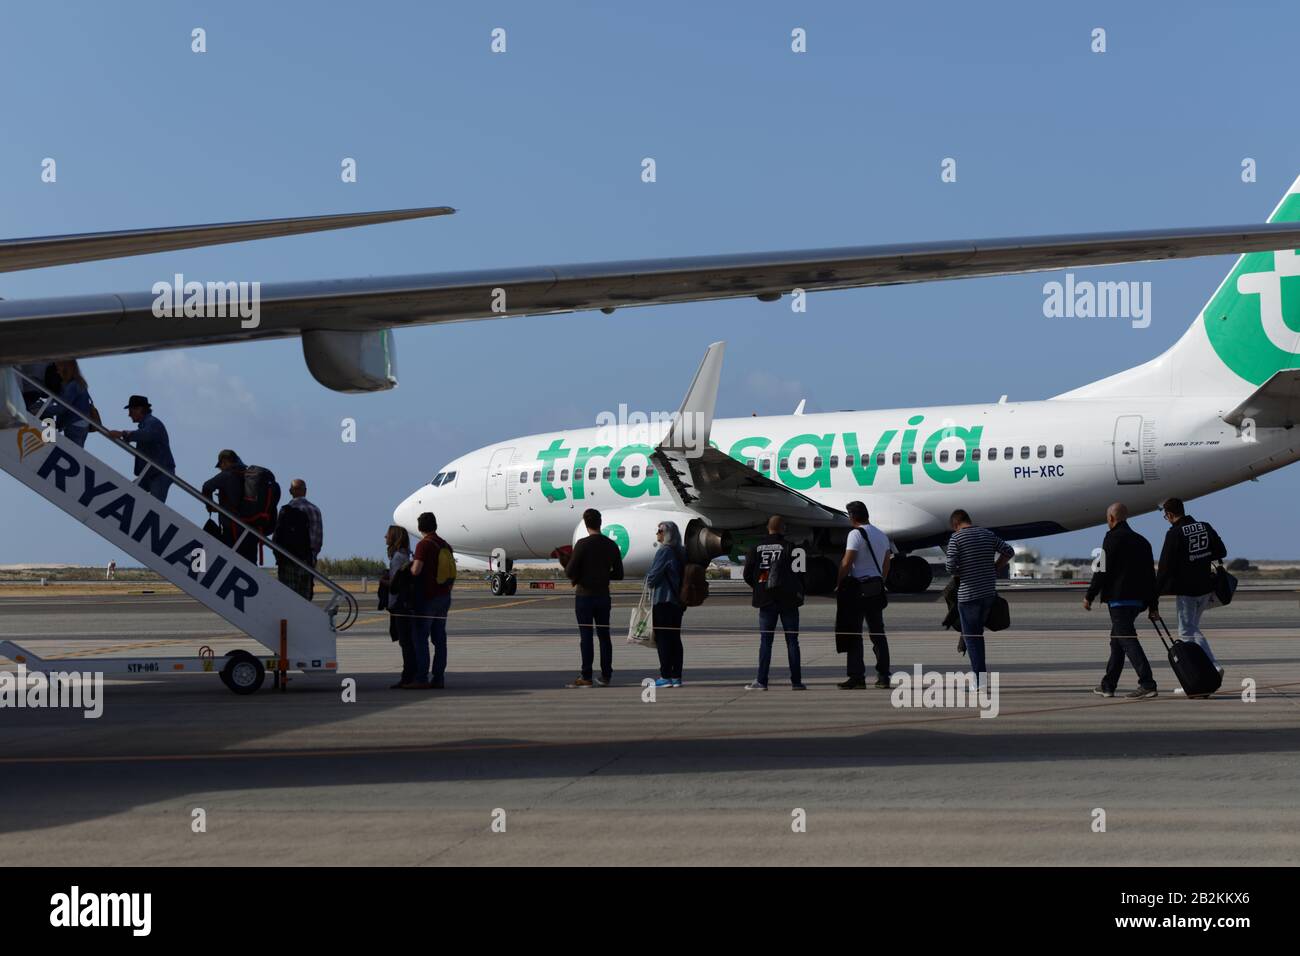 Passengers boarding to the Ryanair plane against the aircraft of another low-cost carrier Transavia in the airport of Faro, Portugal Stock Photo